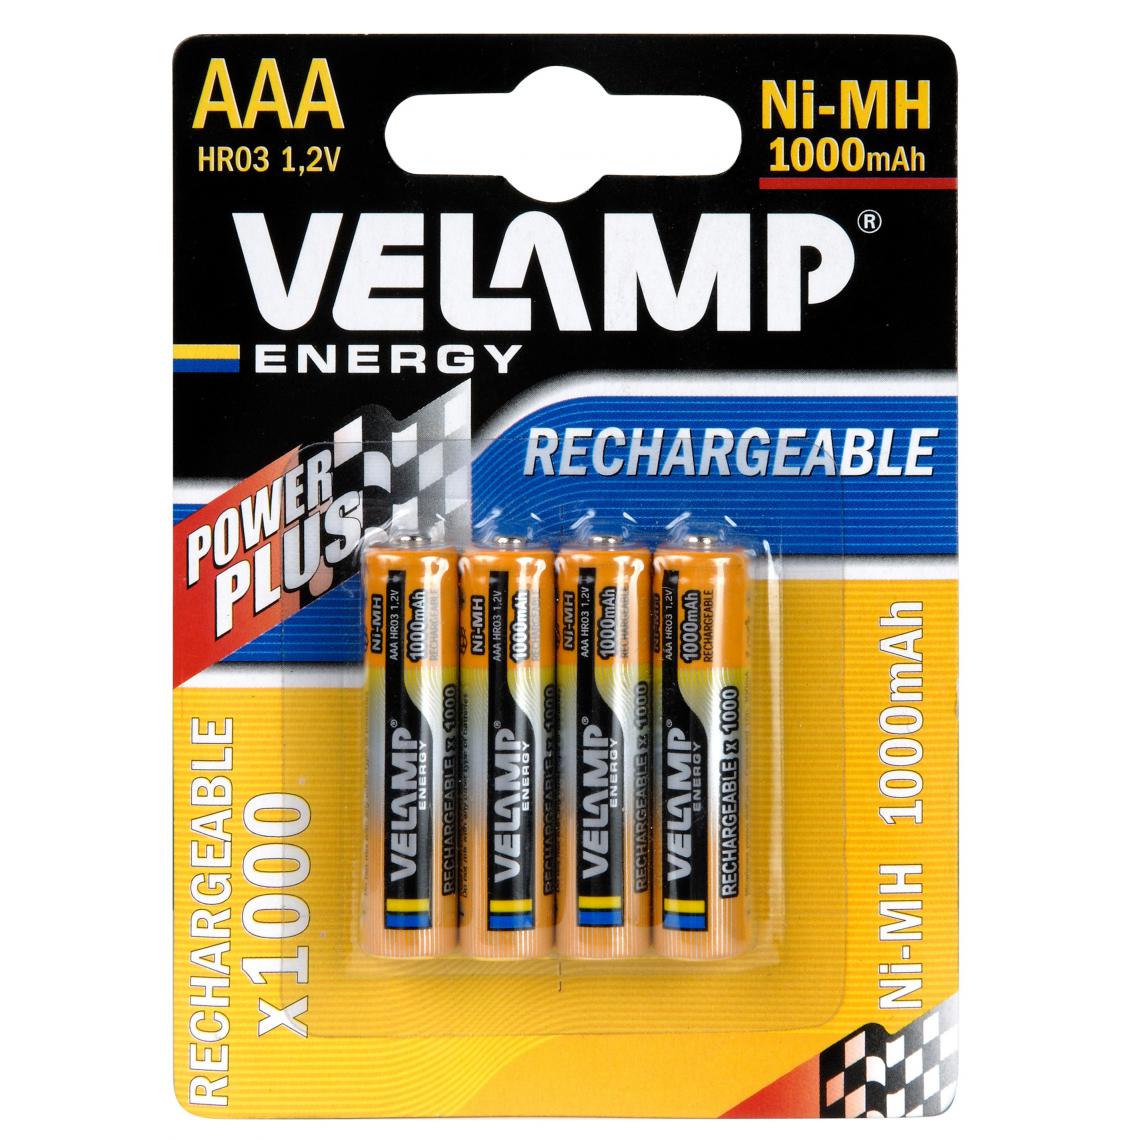 Velamp - 4 piles rechargeables NI-MH AAA 1000 mAh - Piles rechargeables